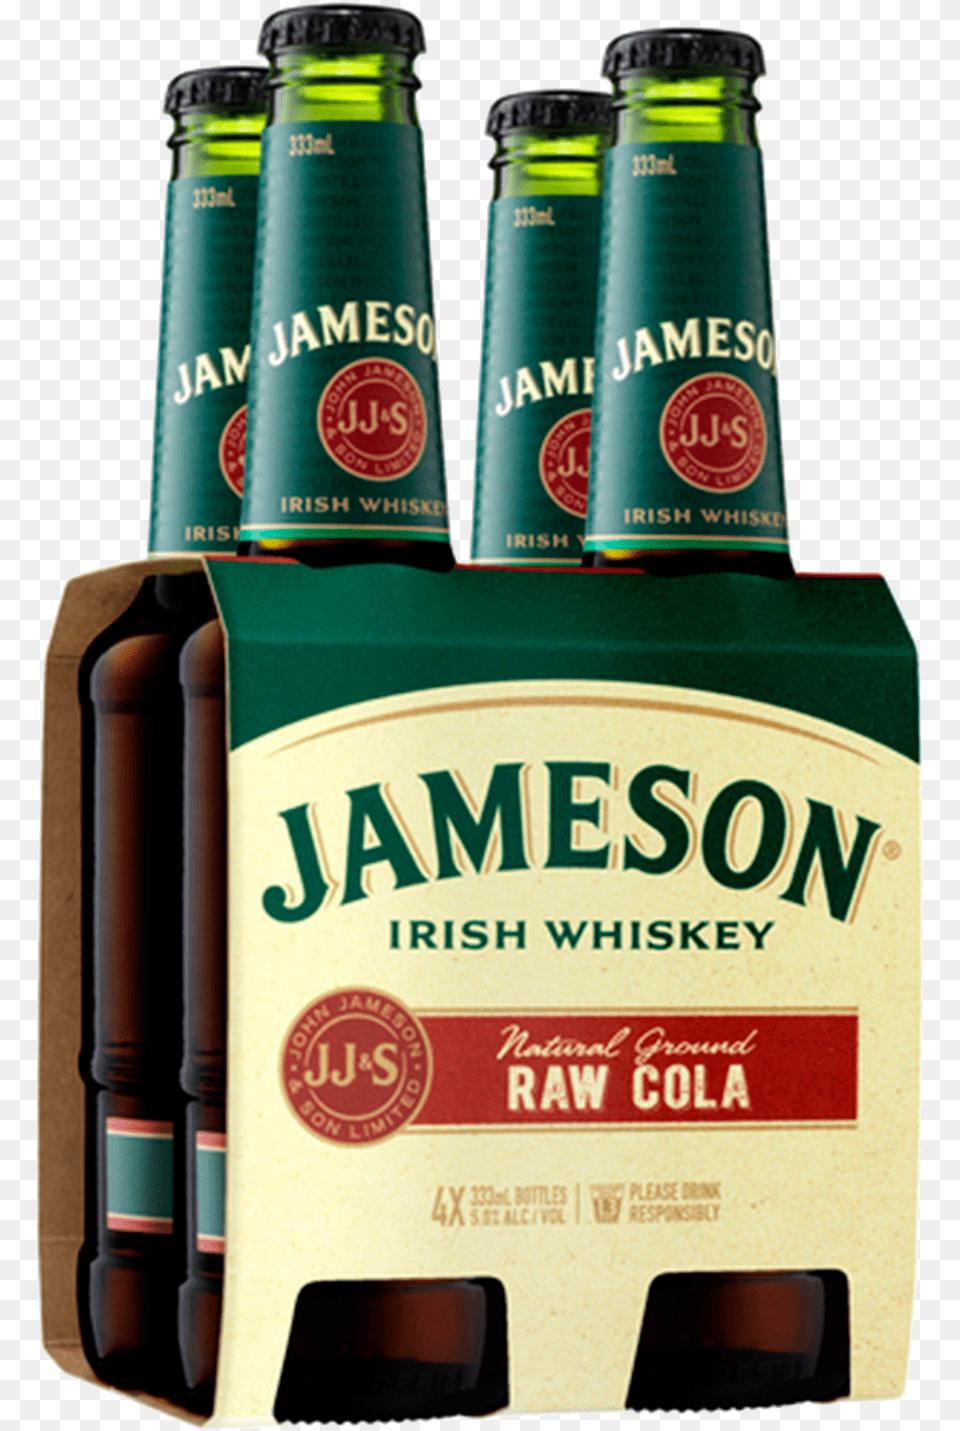 Jameson Irish Whiskey Amp Raw Cola 333ml 4 Pack Jamieson And Raw Cola, Alcohol, Beer, Beer Bottle, Beverage Free Png